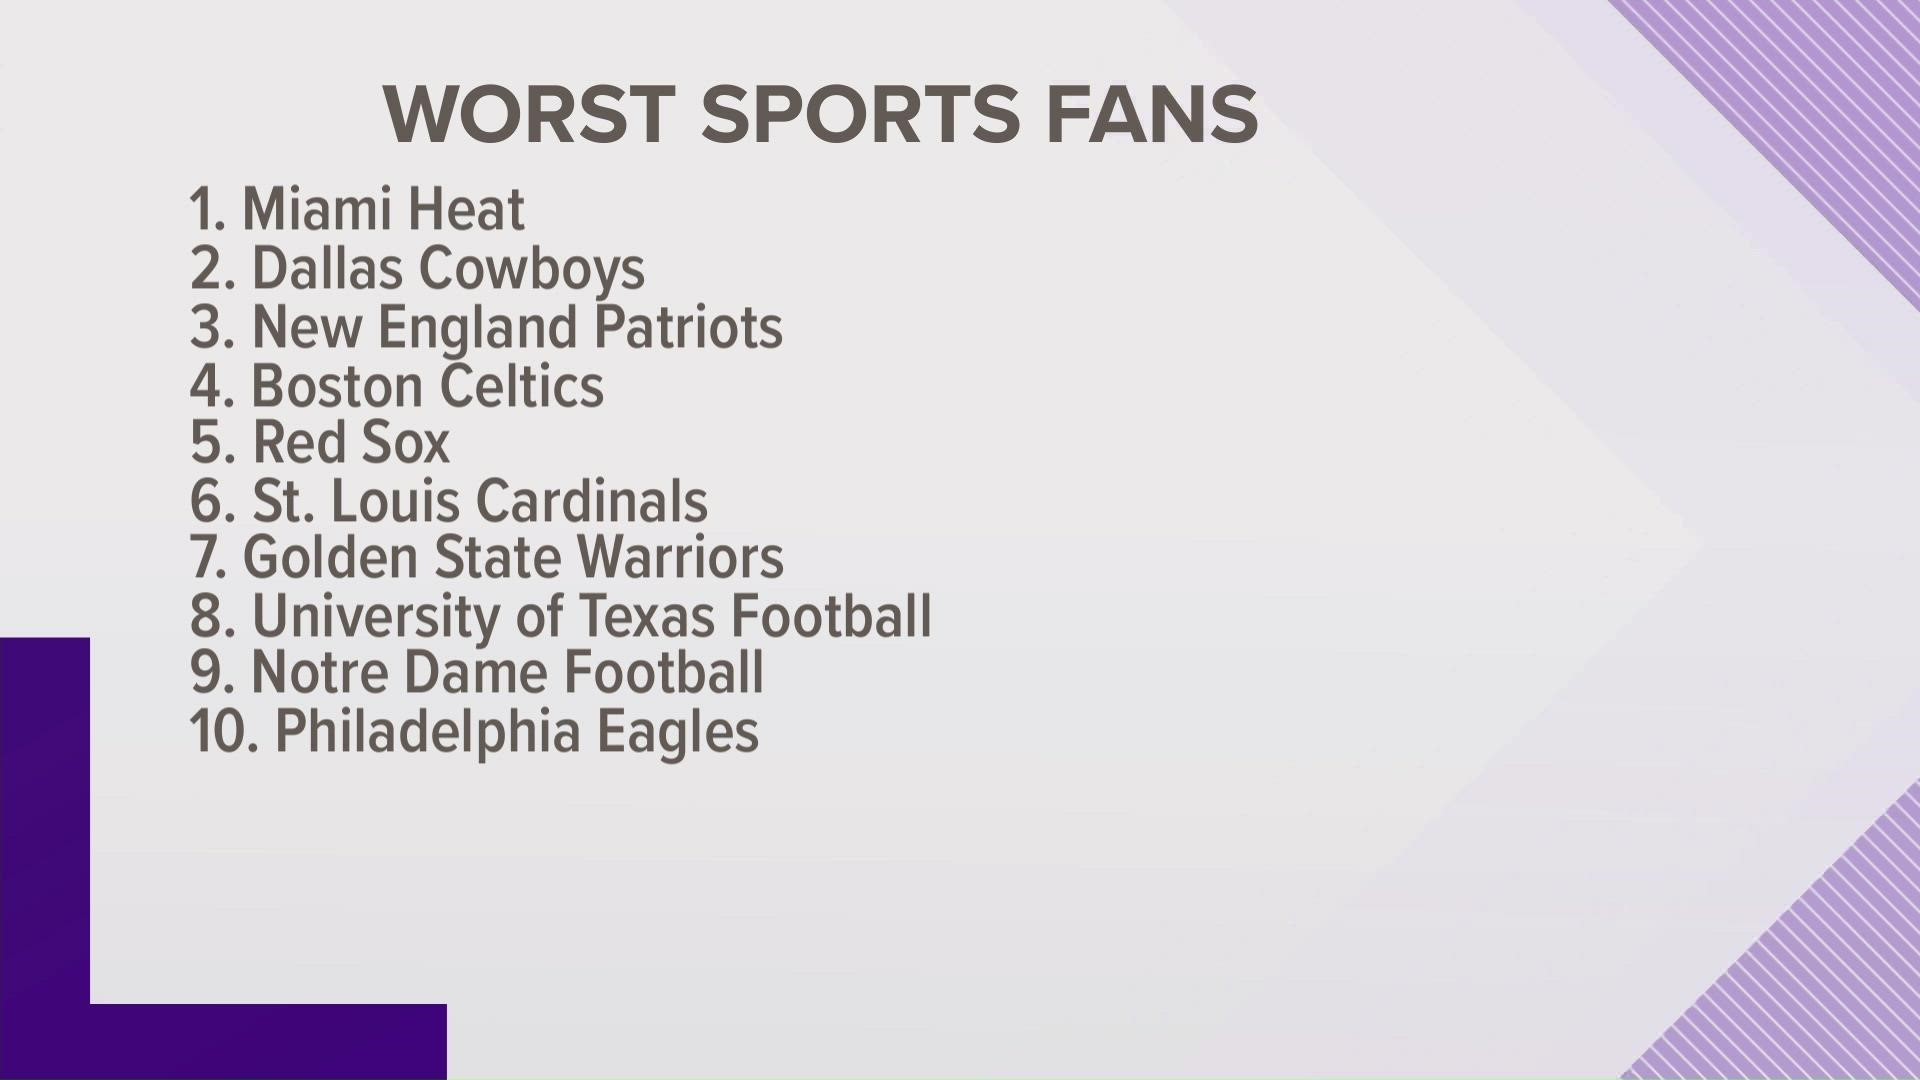 In an opinion piece published to USA TODAY, the fanbases of the Cowboys and Texas Longhorns were named among the ten worst.